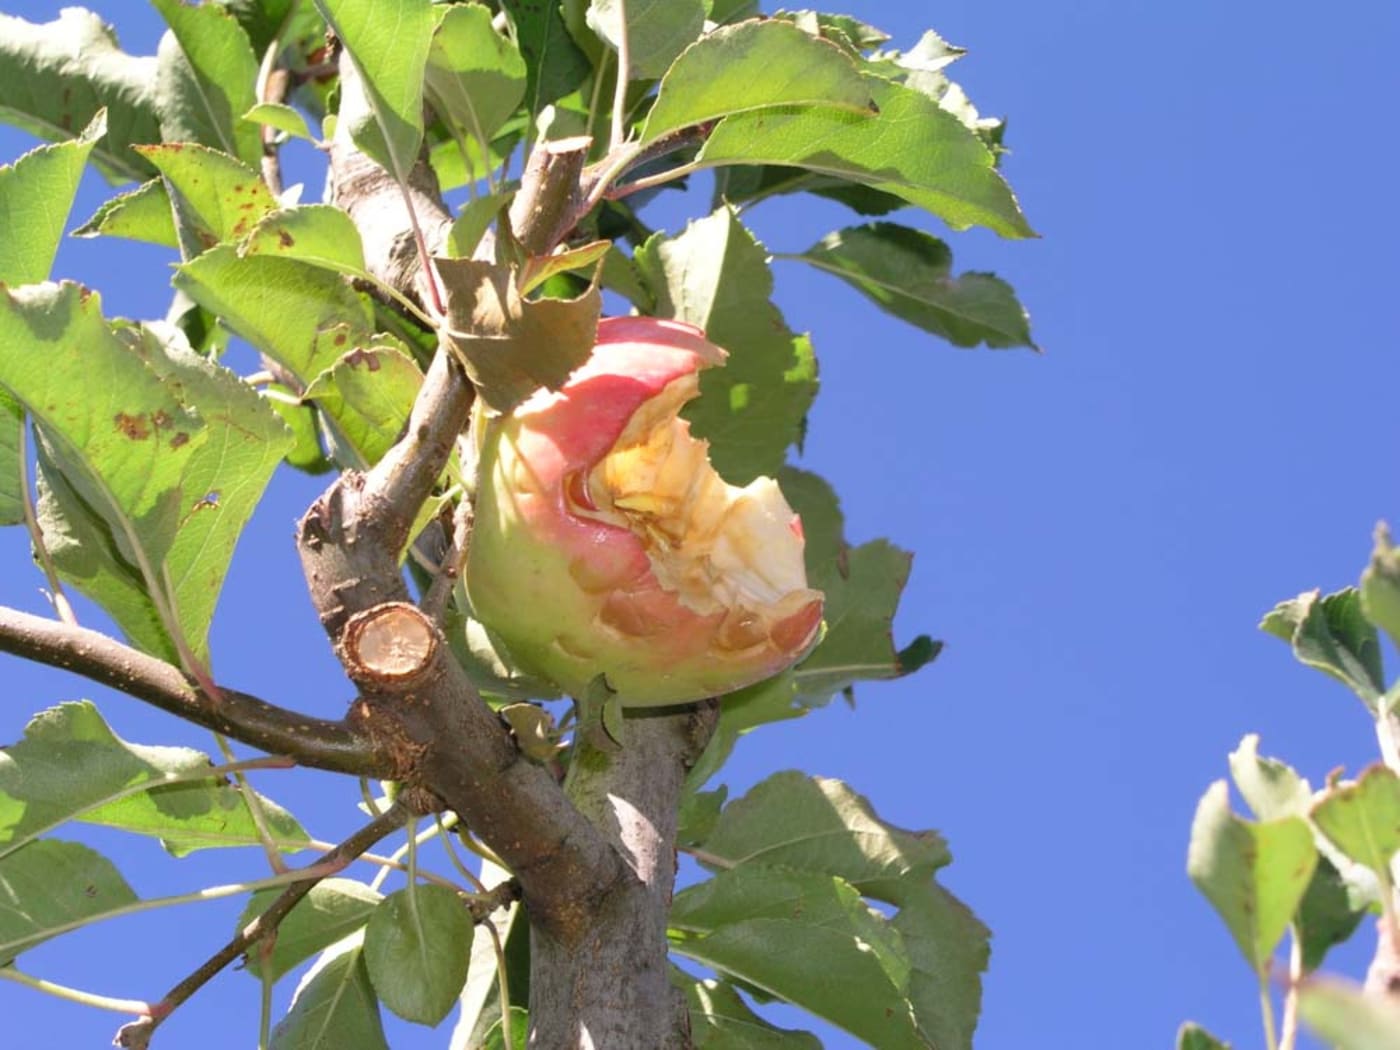 An apple partially eaten by a baudin's cockatoo